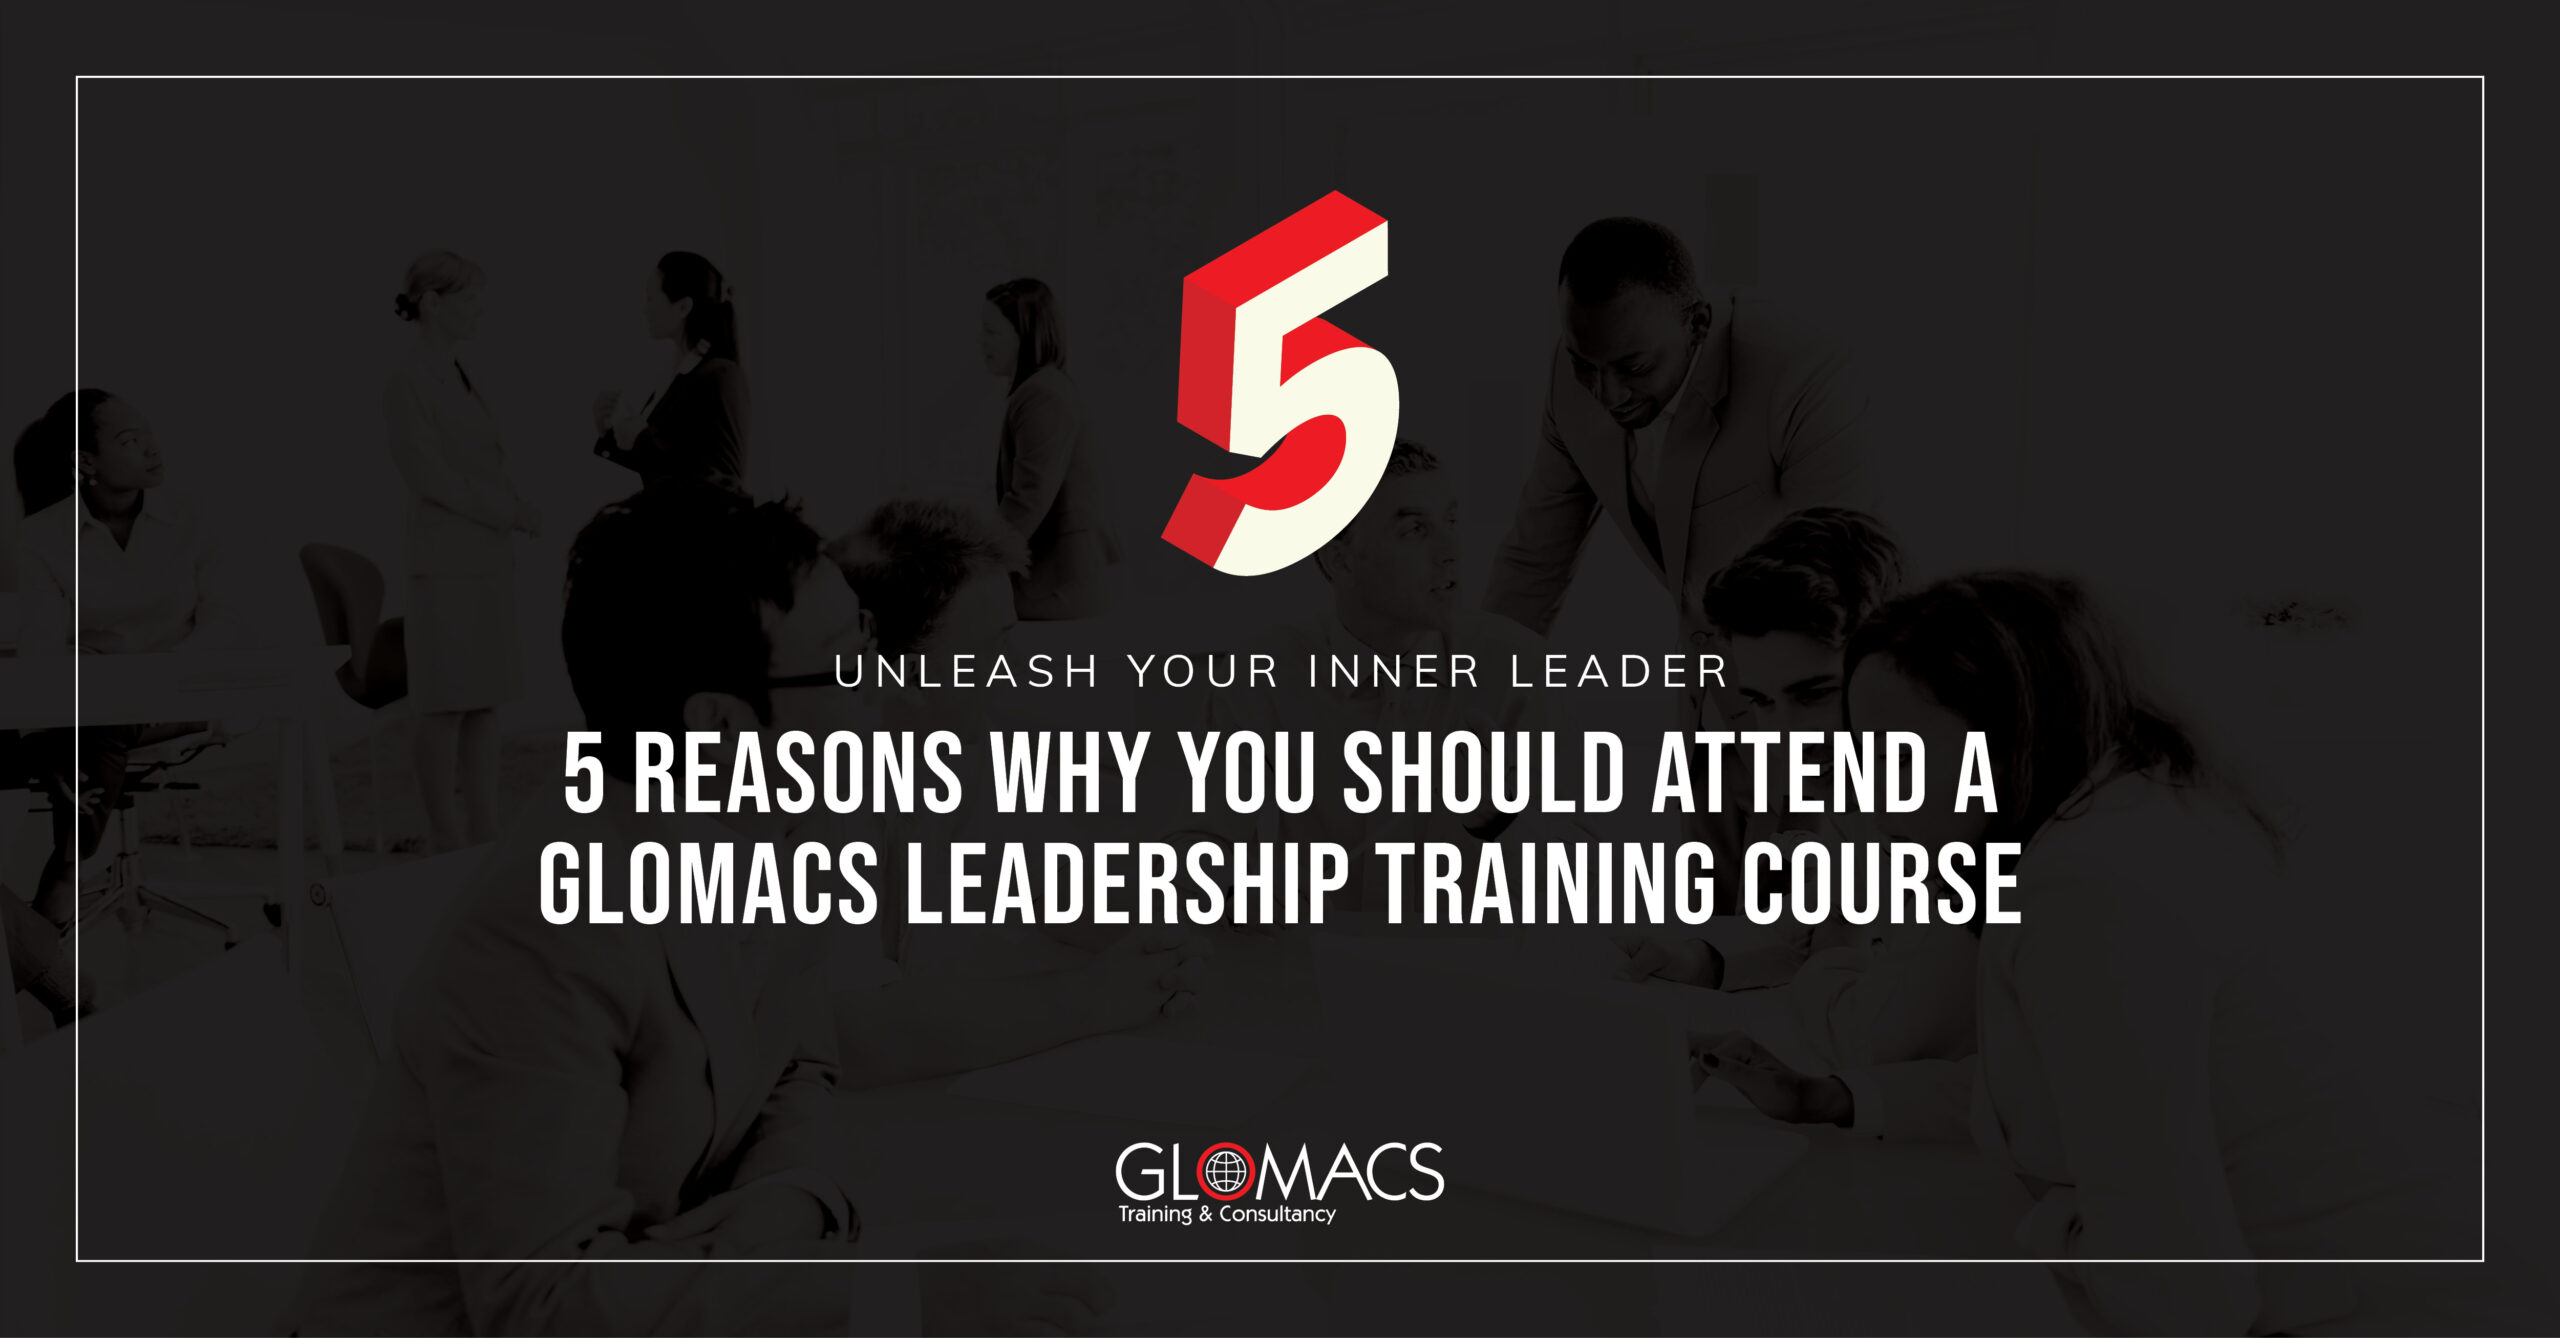 Unleash Your Inner Leader: 5 Reasons Why You Should Attend a GLOMACS Leadership Training Course